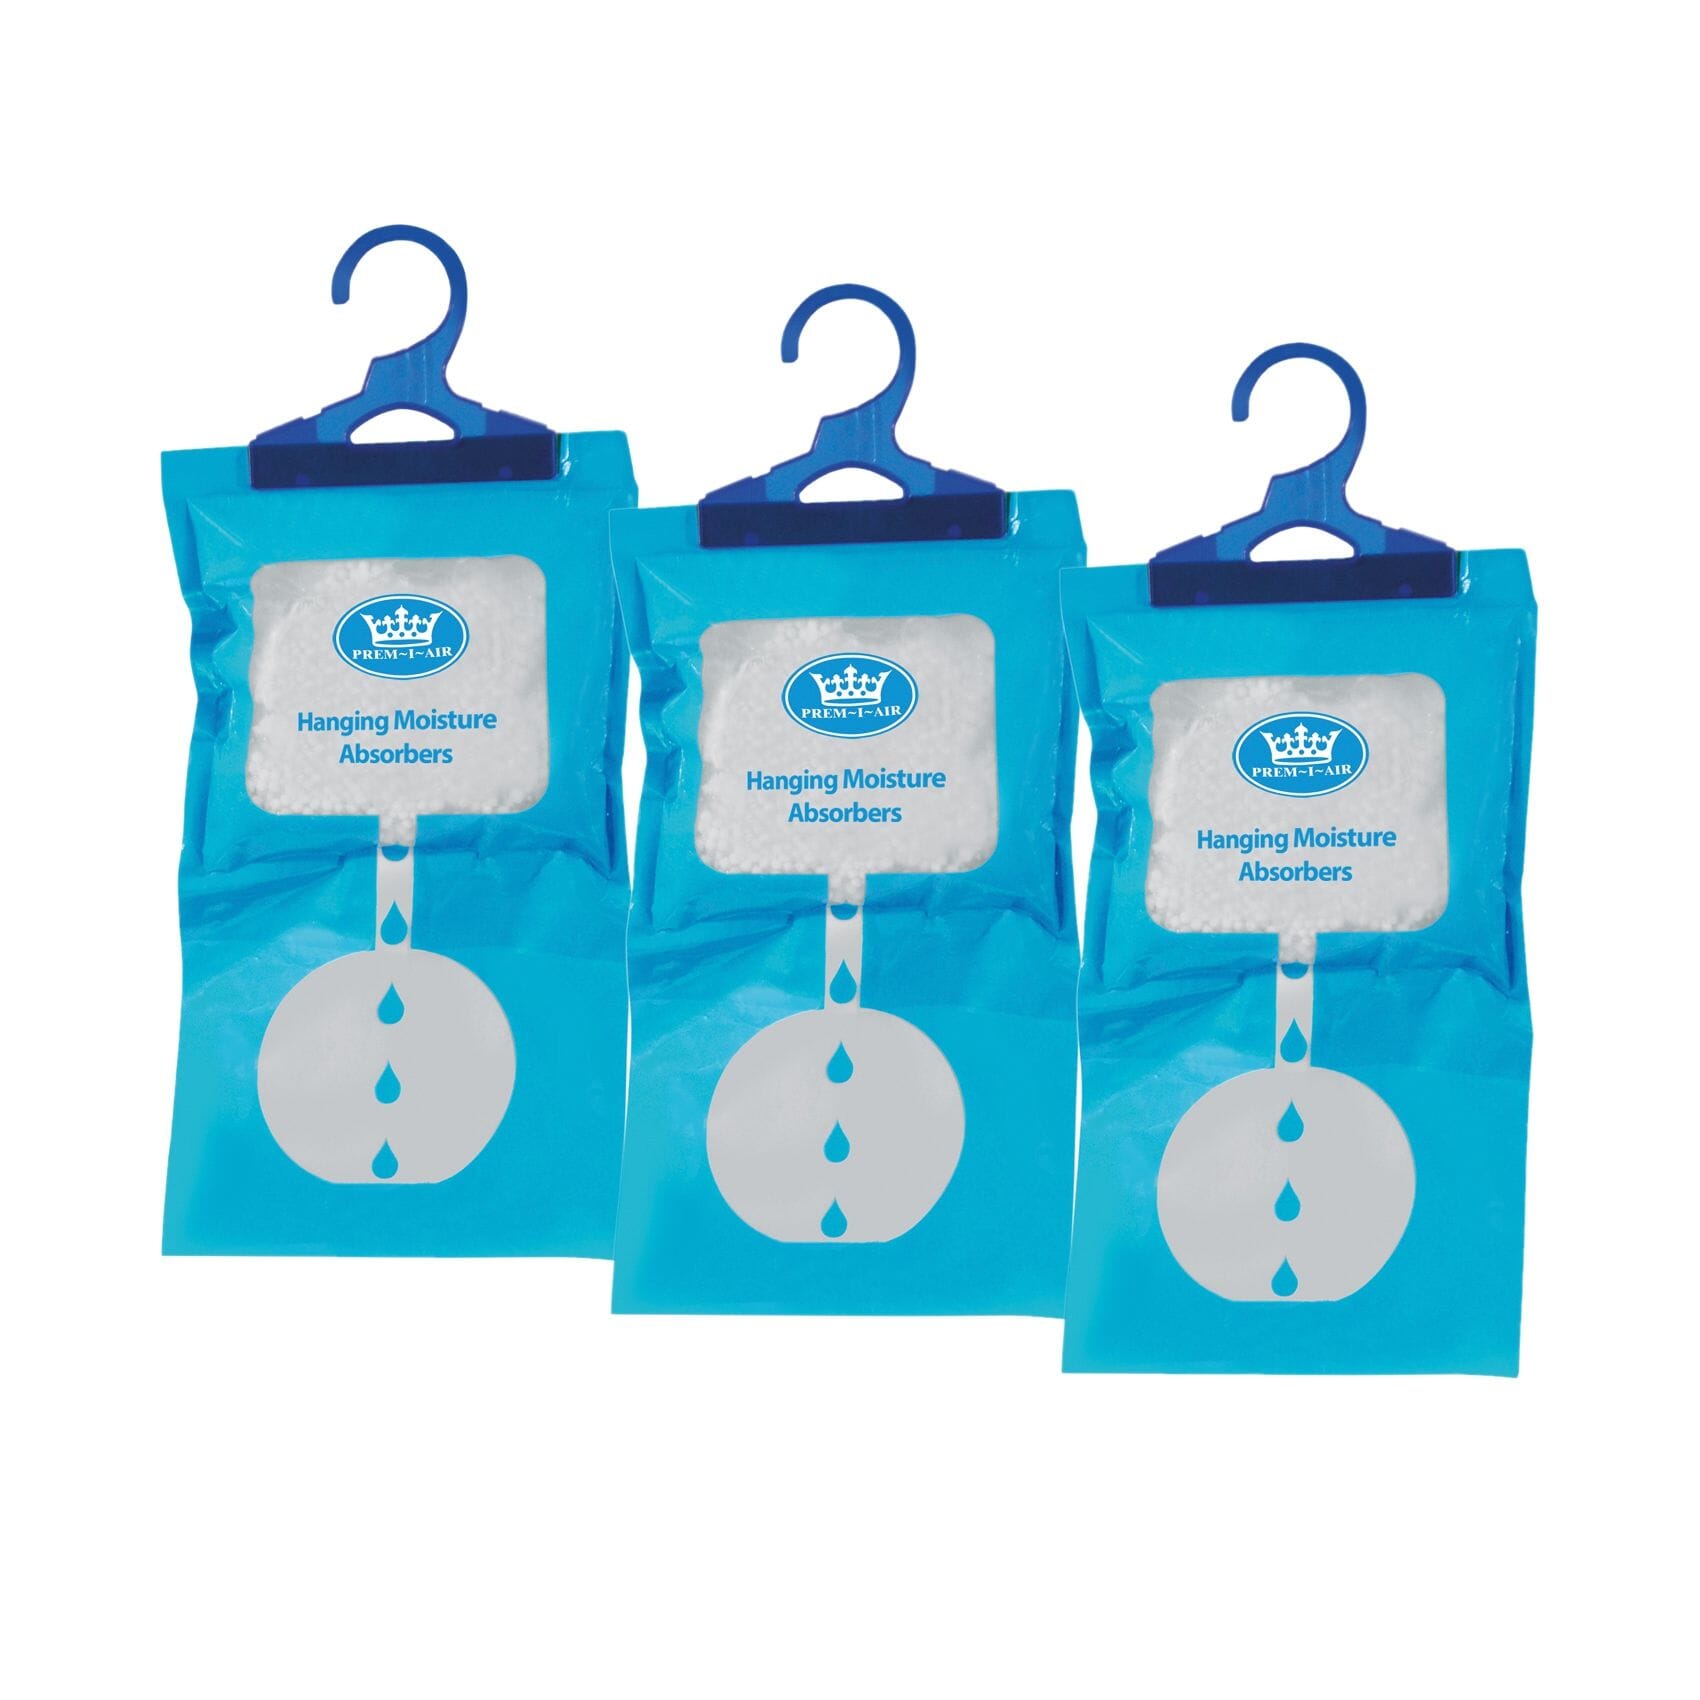 View PremIAir Hanging Moisture Absorbers Pack of 3 information